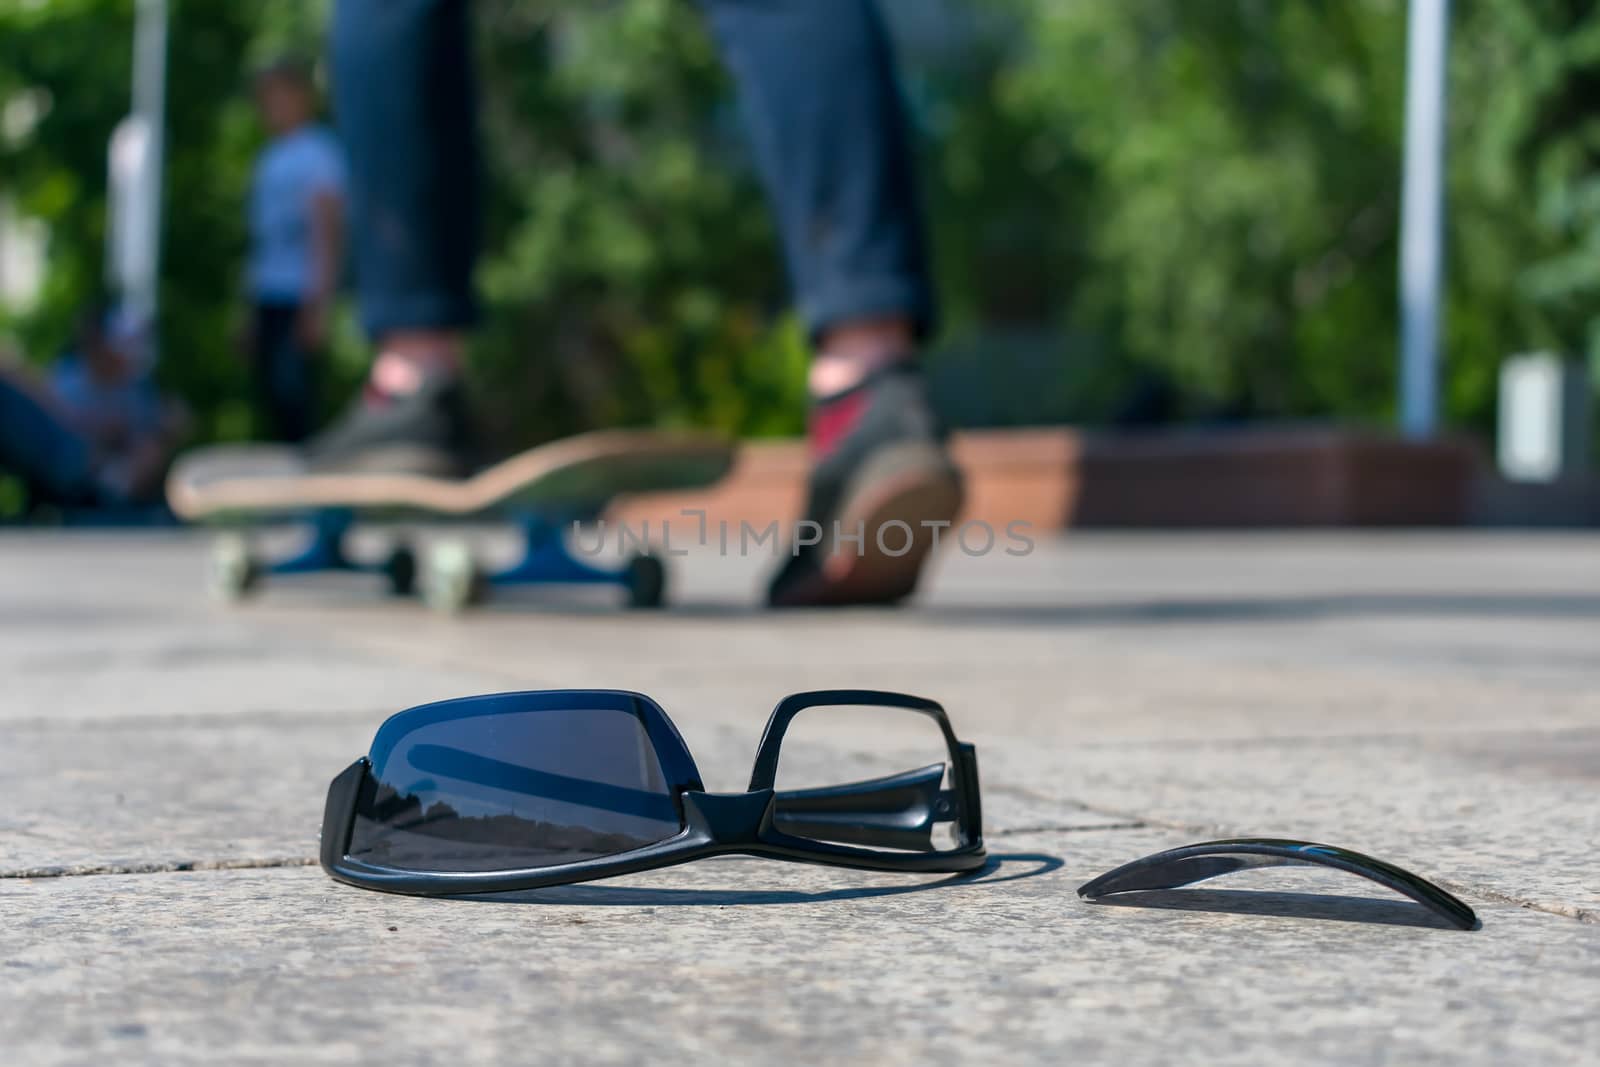 Skateboarder dropped his black glasses on the asphalt while riding the board by Skaron